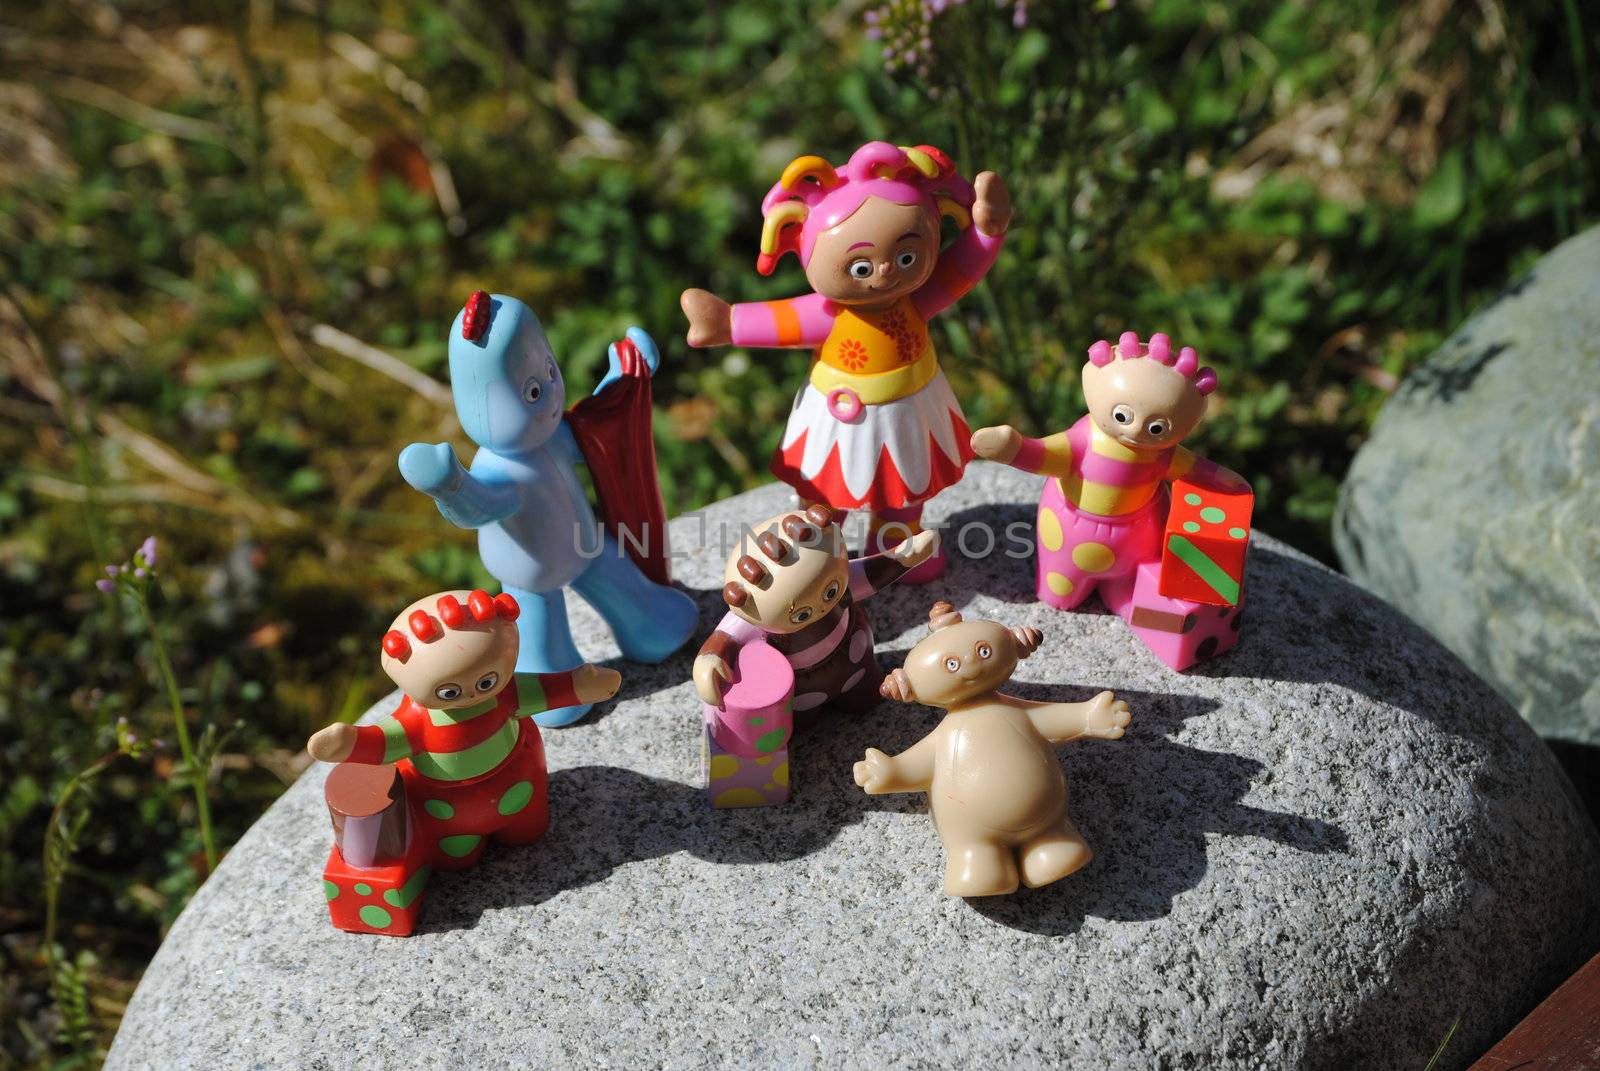 toys from "in the night garden"